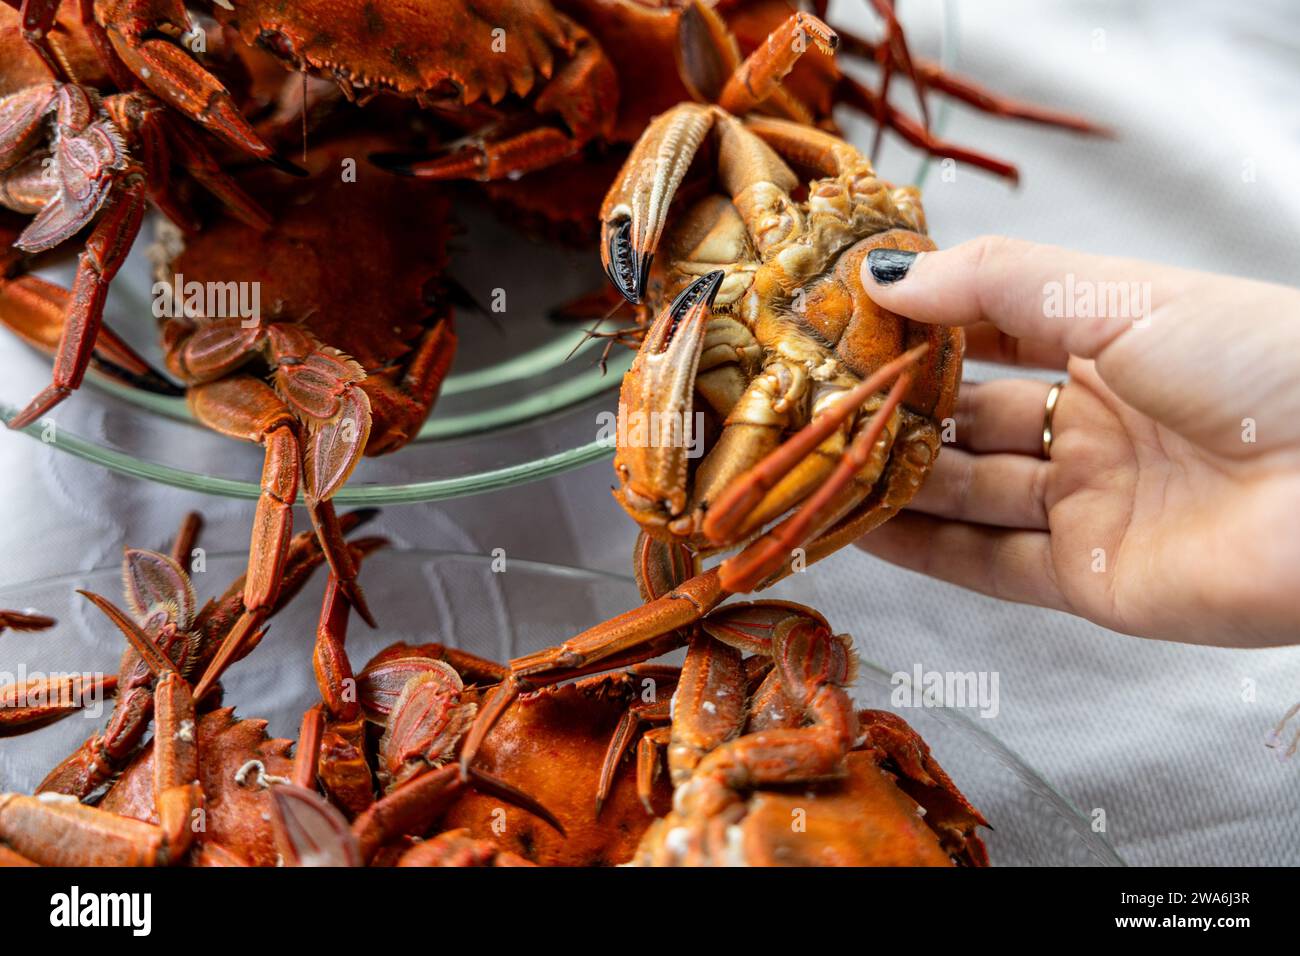 Plate of several sea crabs with girl's hand holding one of them Stock Photo